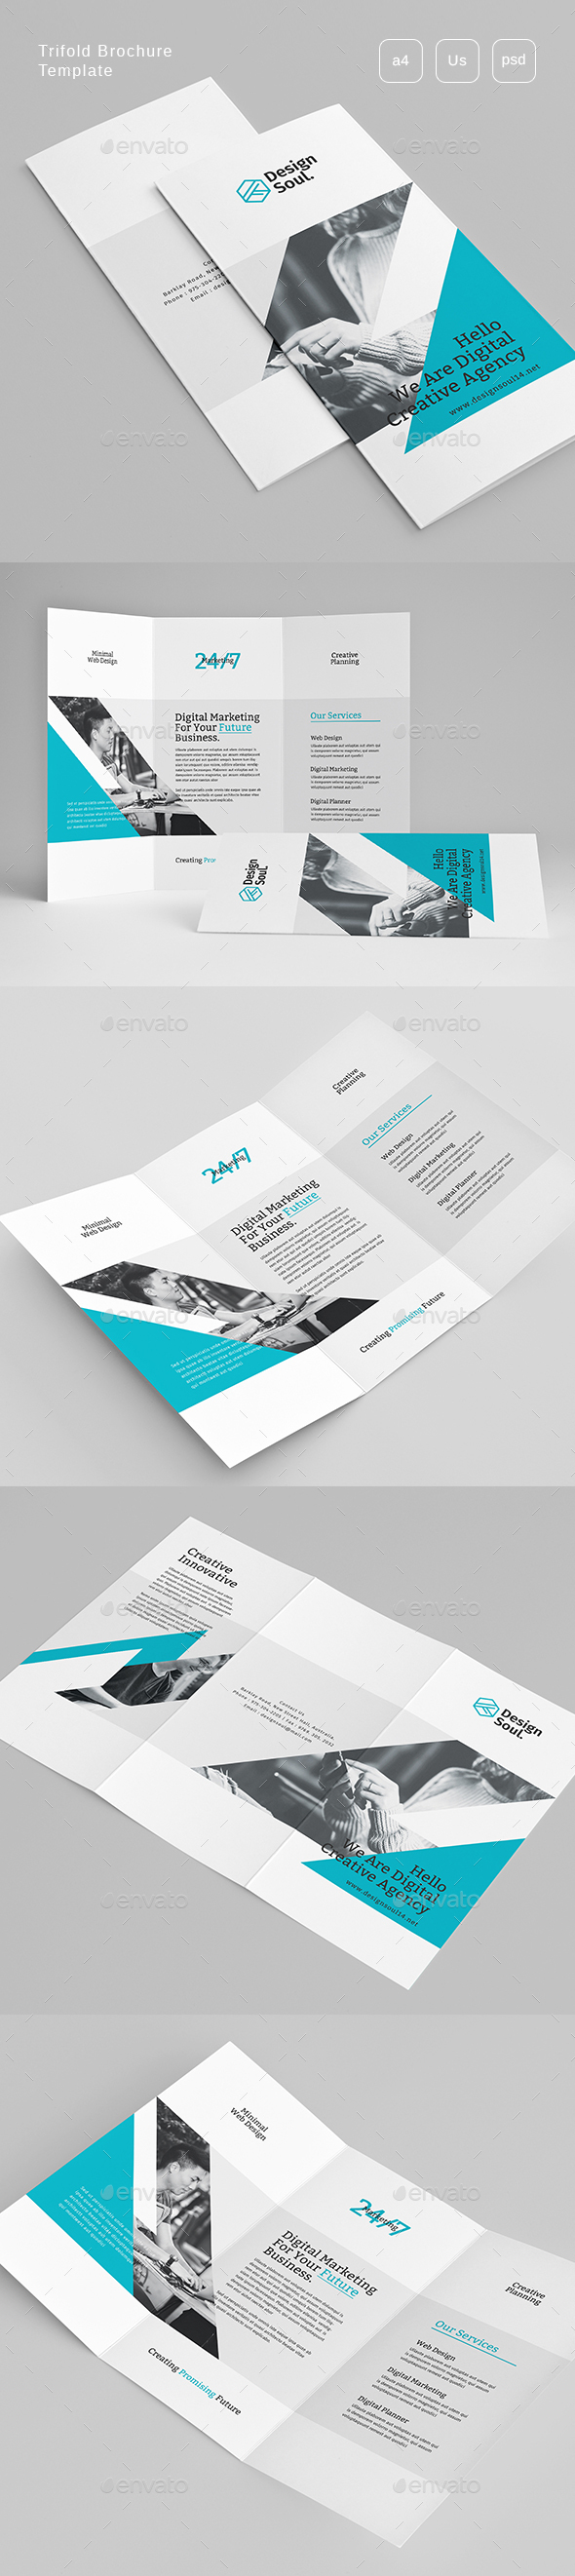 [DOWNLOAD]Trifold Brochure